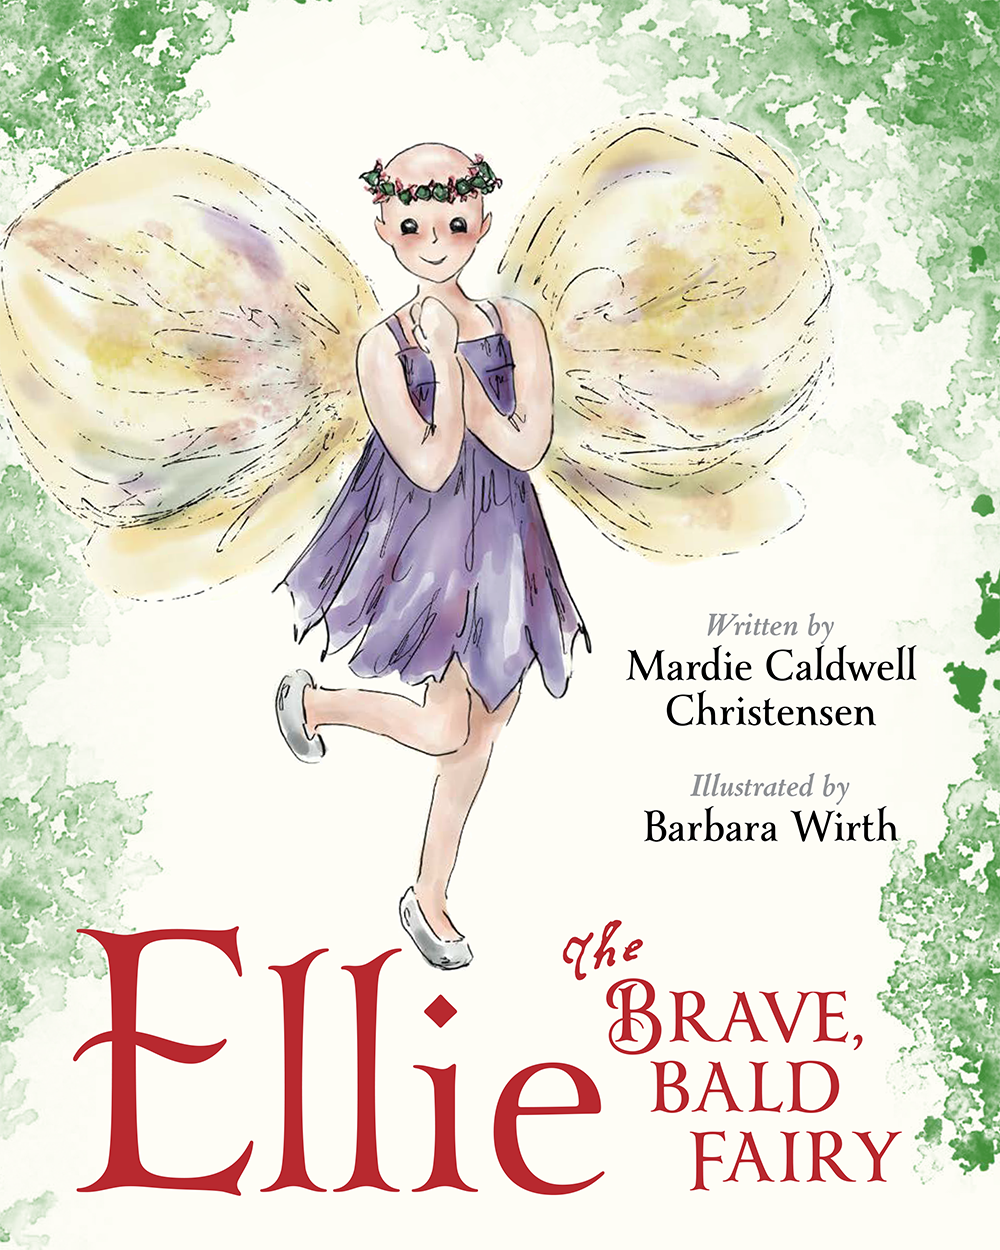 Ellie the Brave, Bald Fairy - Soft Cover